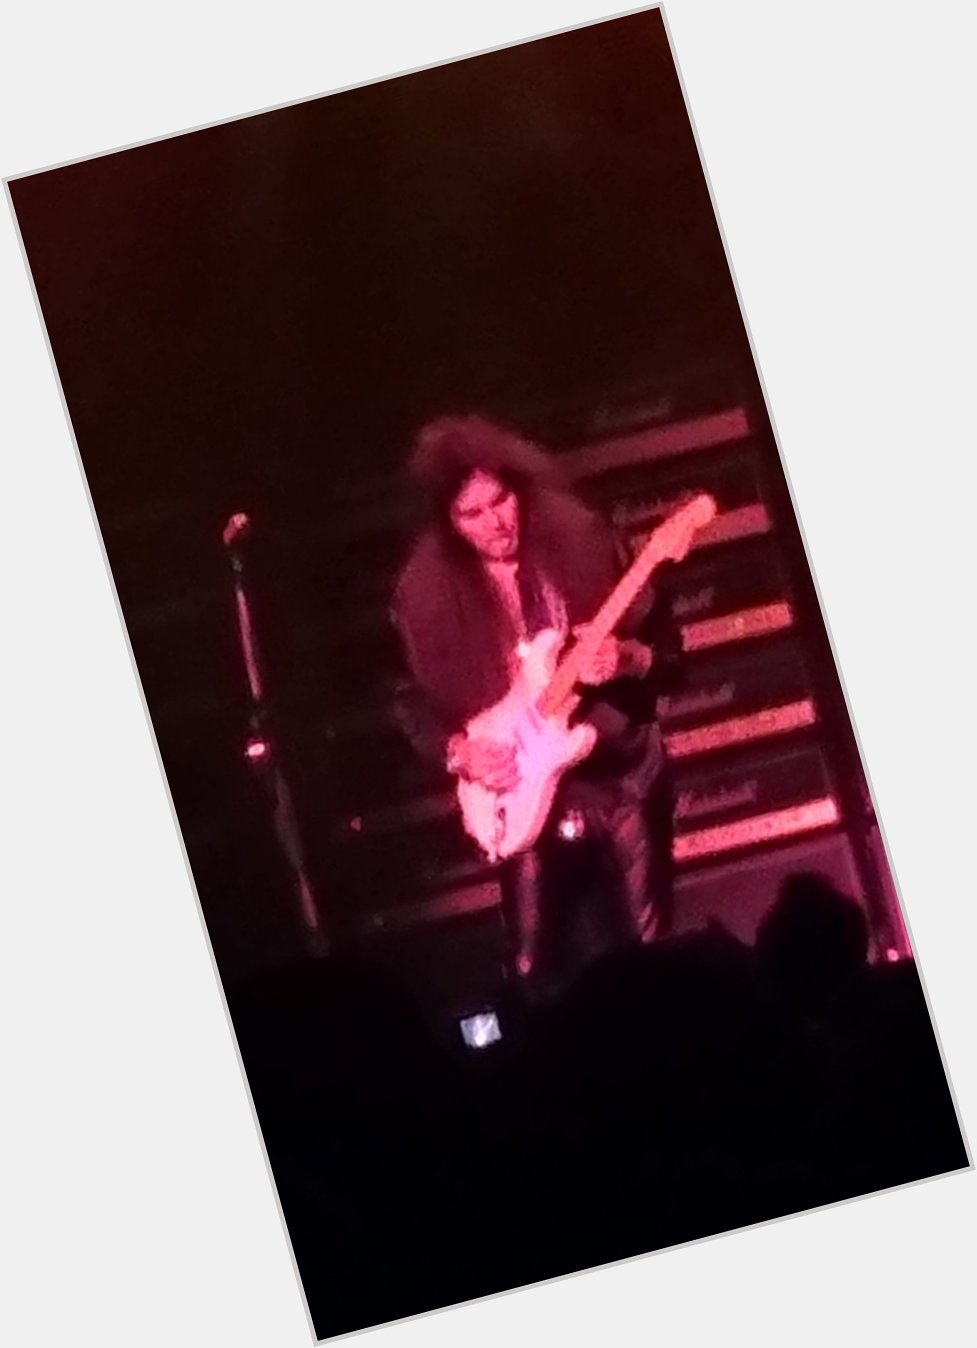  Malmsteen
Happy birthday  Please come to Japan again  